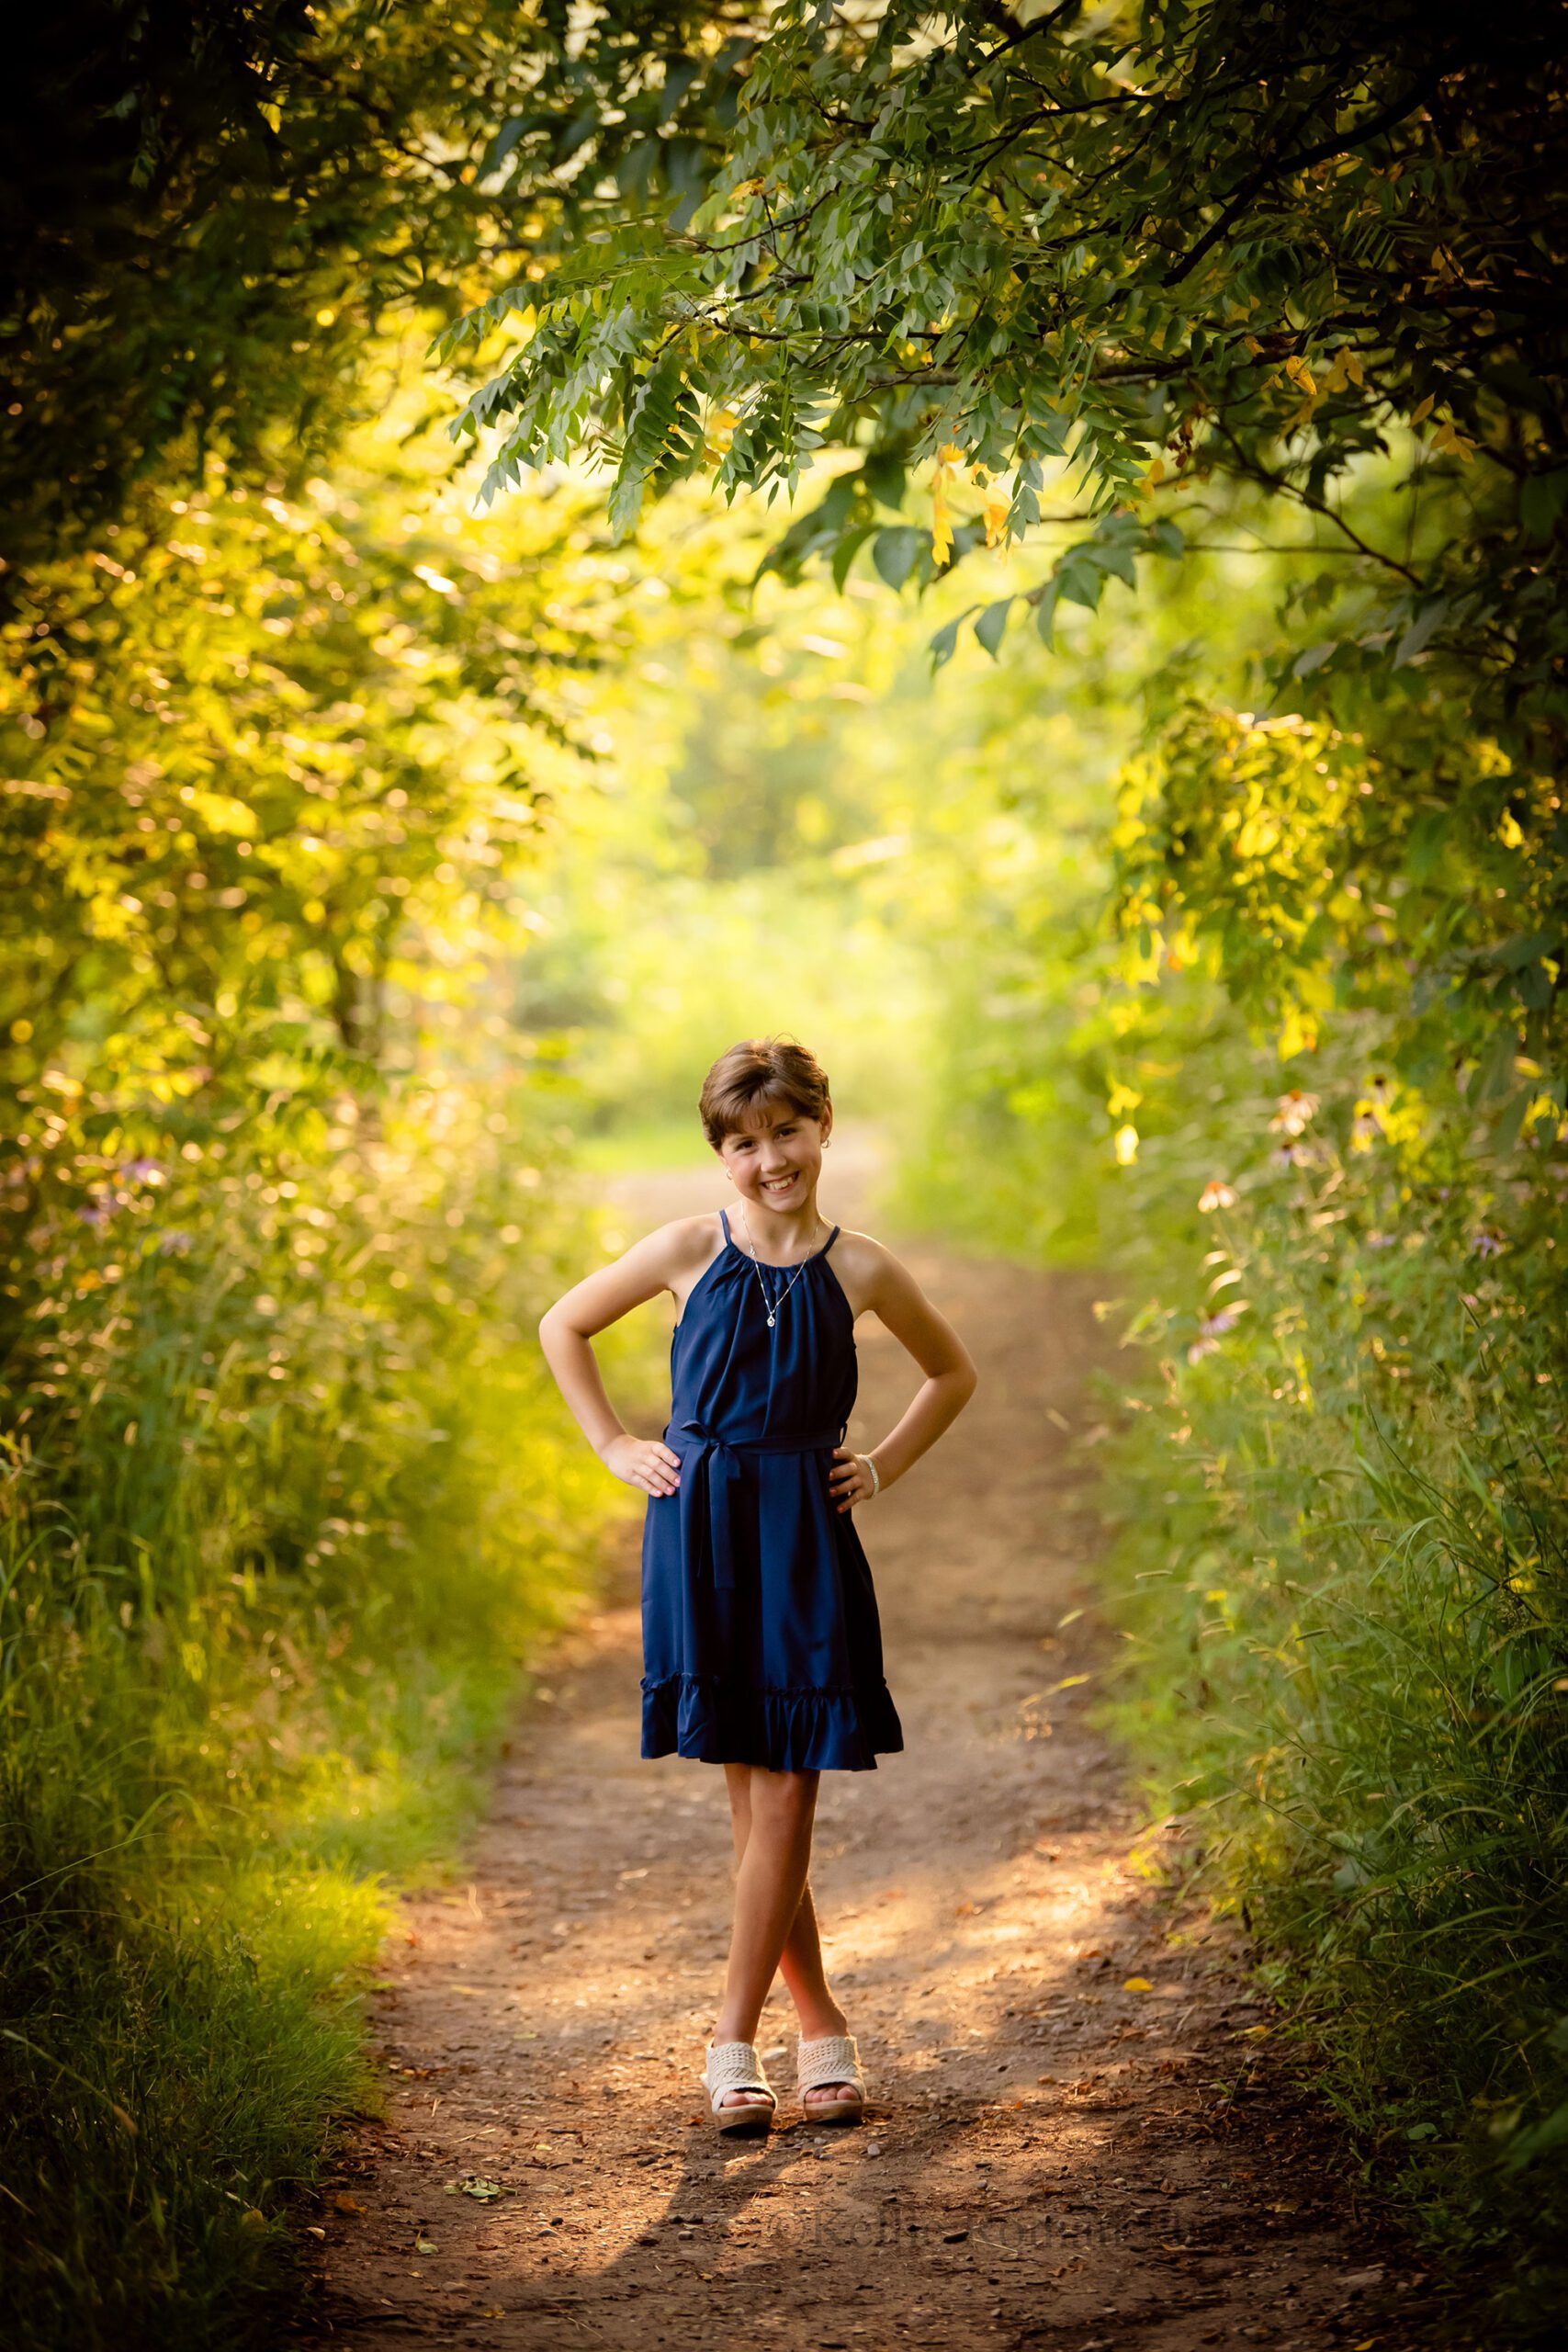 milwaukee birthday photos. 10 year old girl in milwaukee park standing with her hands on her hips. she's on a dirt trail surrounded by trees. she has a navy dress on with tan sandals.